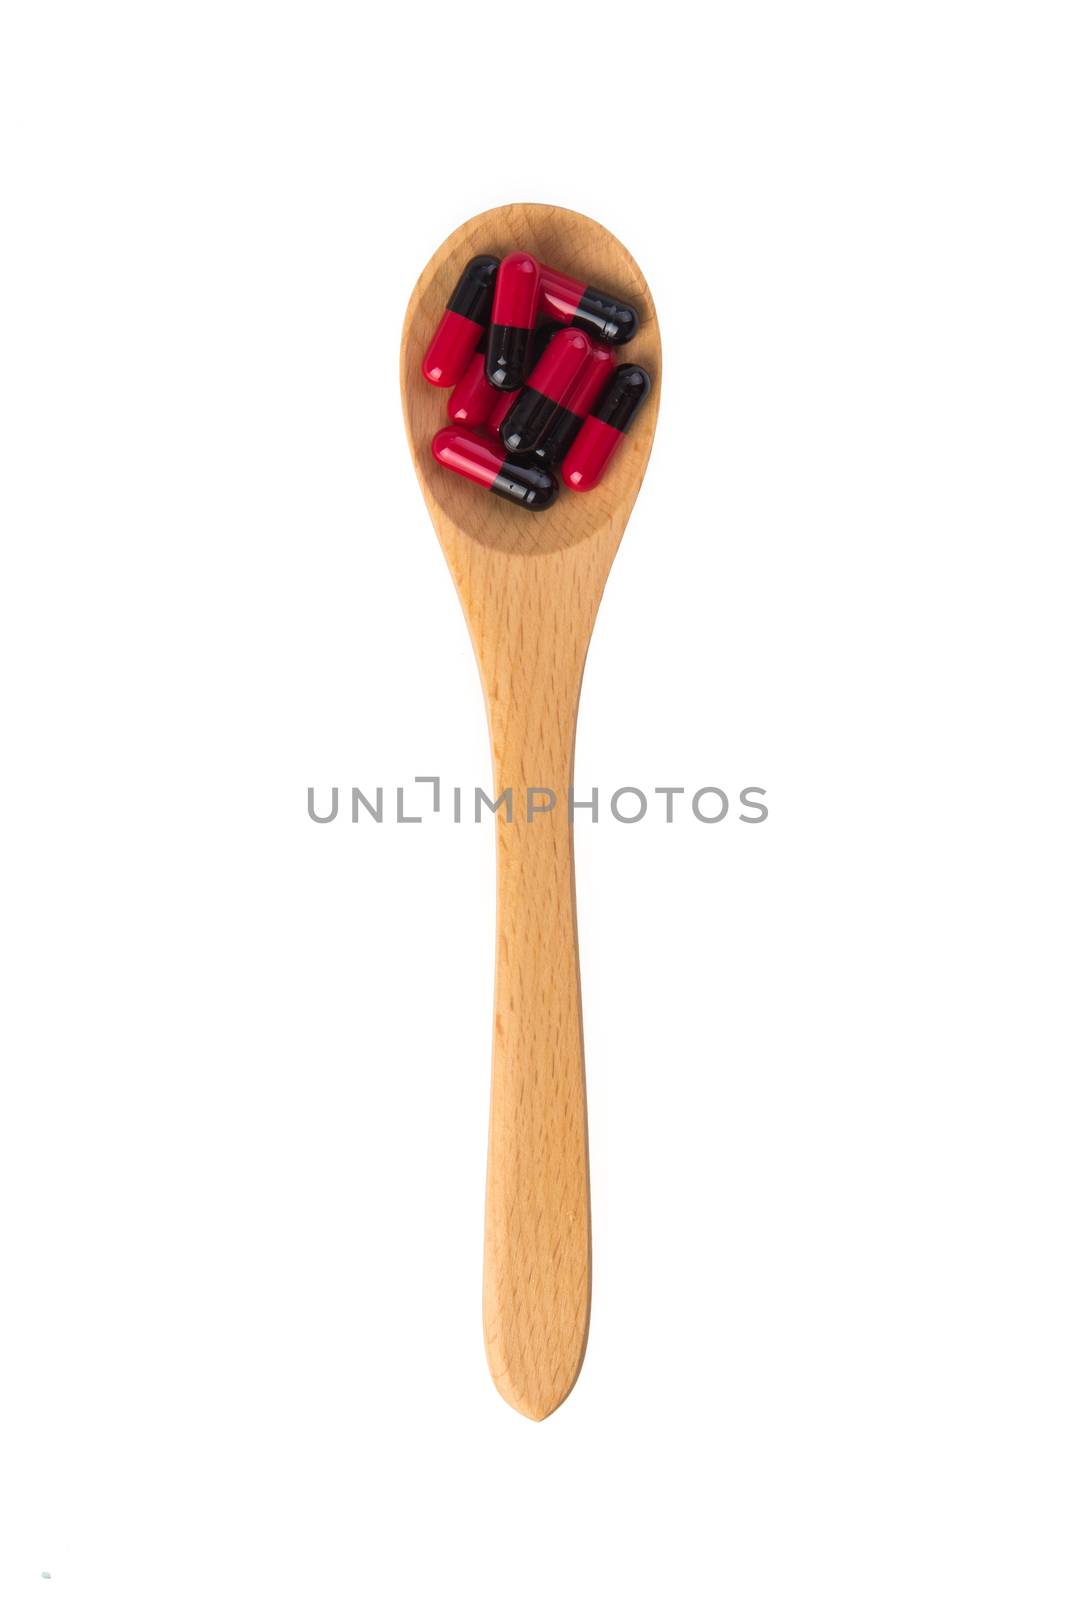  pills in wooden spoon by tehcheesiong